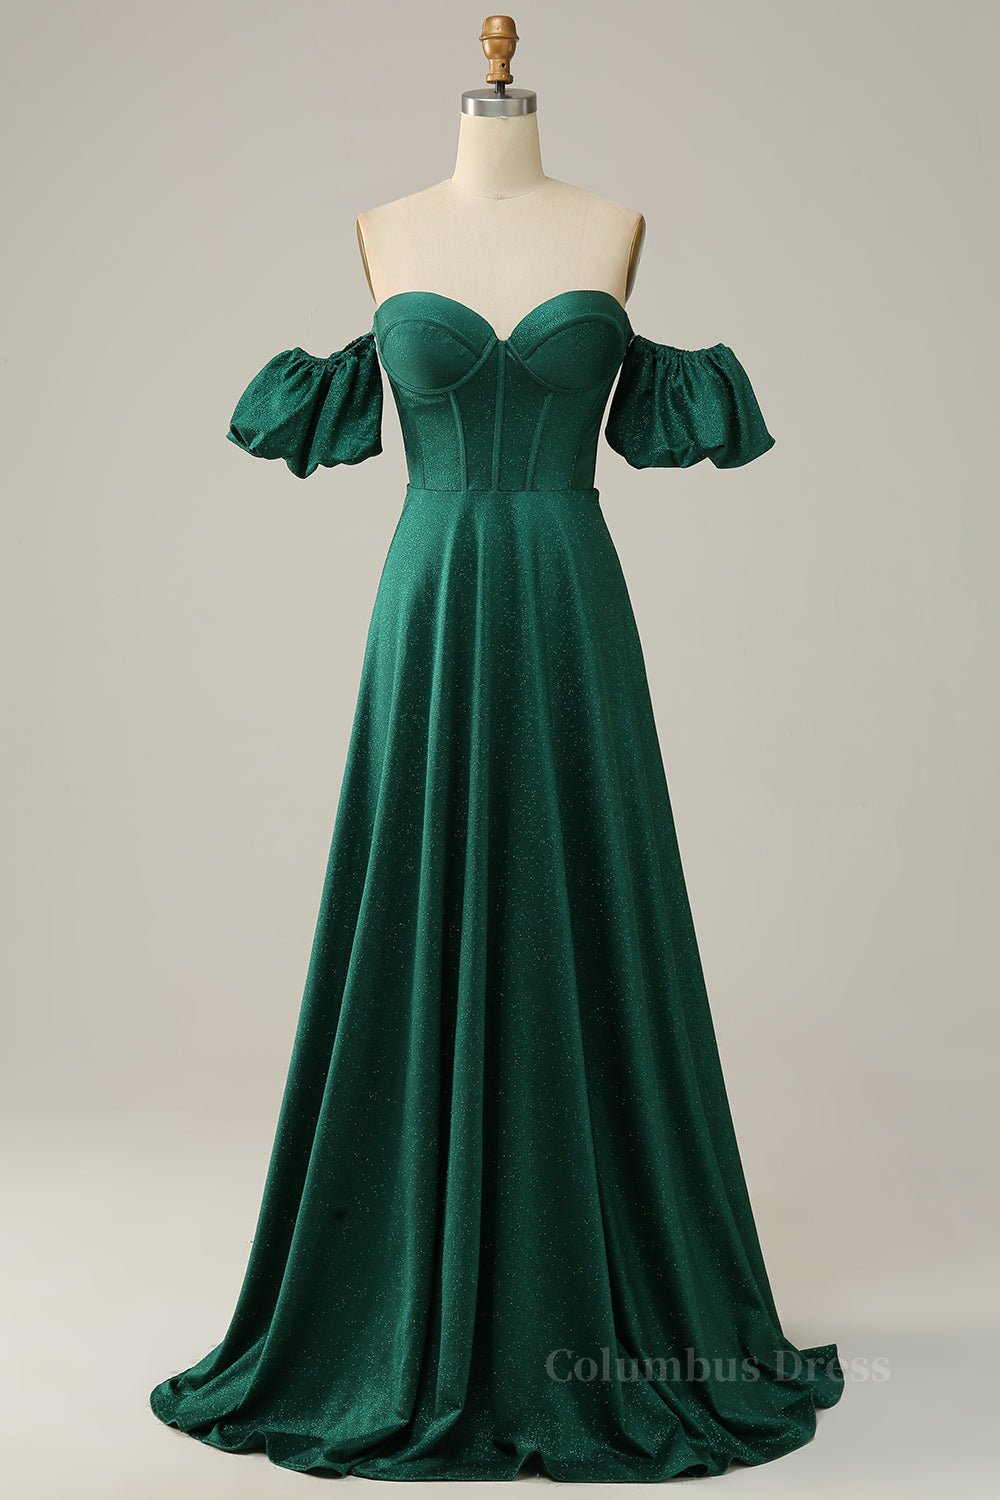 Prom Dresses 2016, Sparkly Hunter Green Off-the-Shoulder Puff Sleeves A-line Long Prom Dress